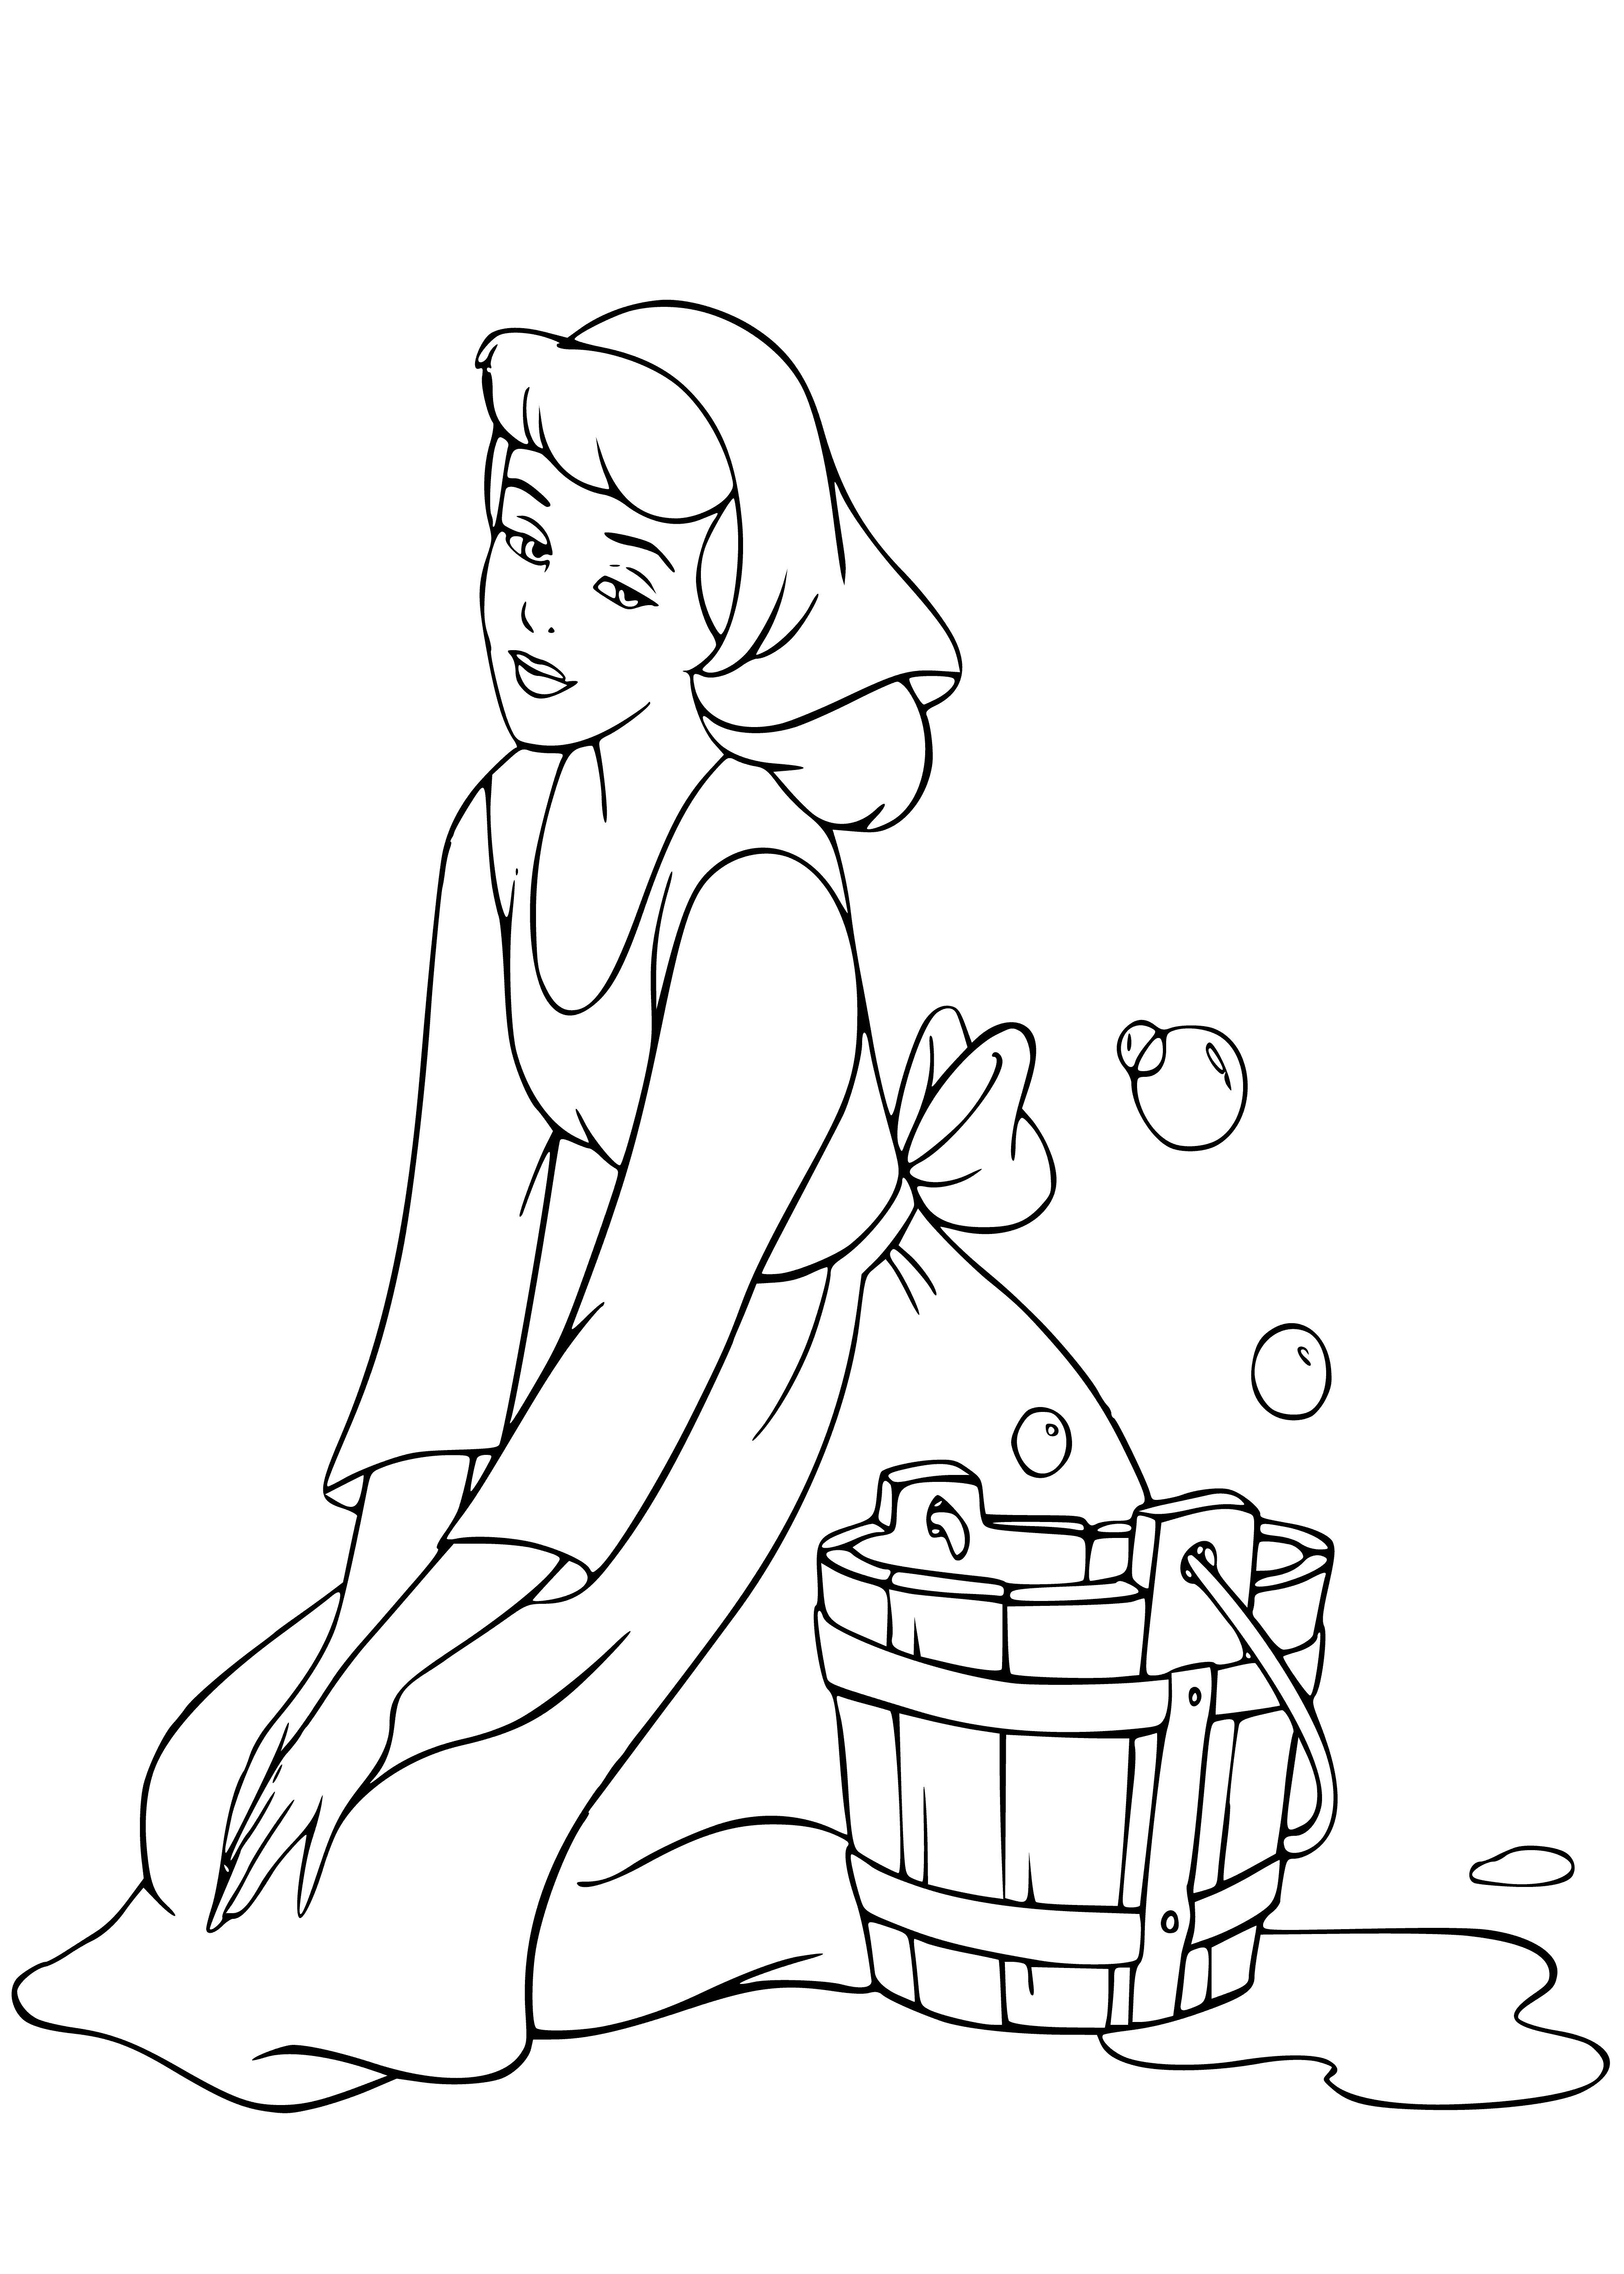 Cinderella washes the floor coloring page